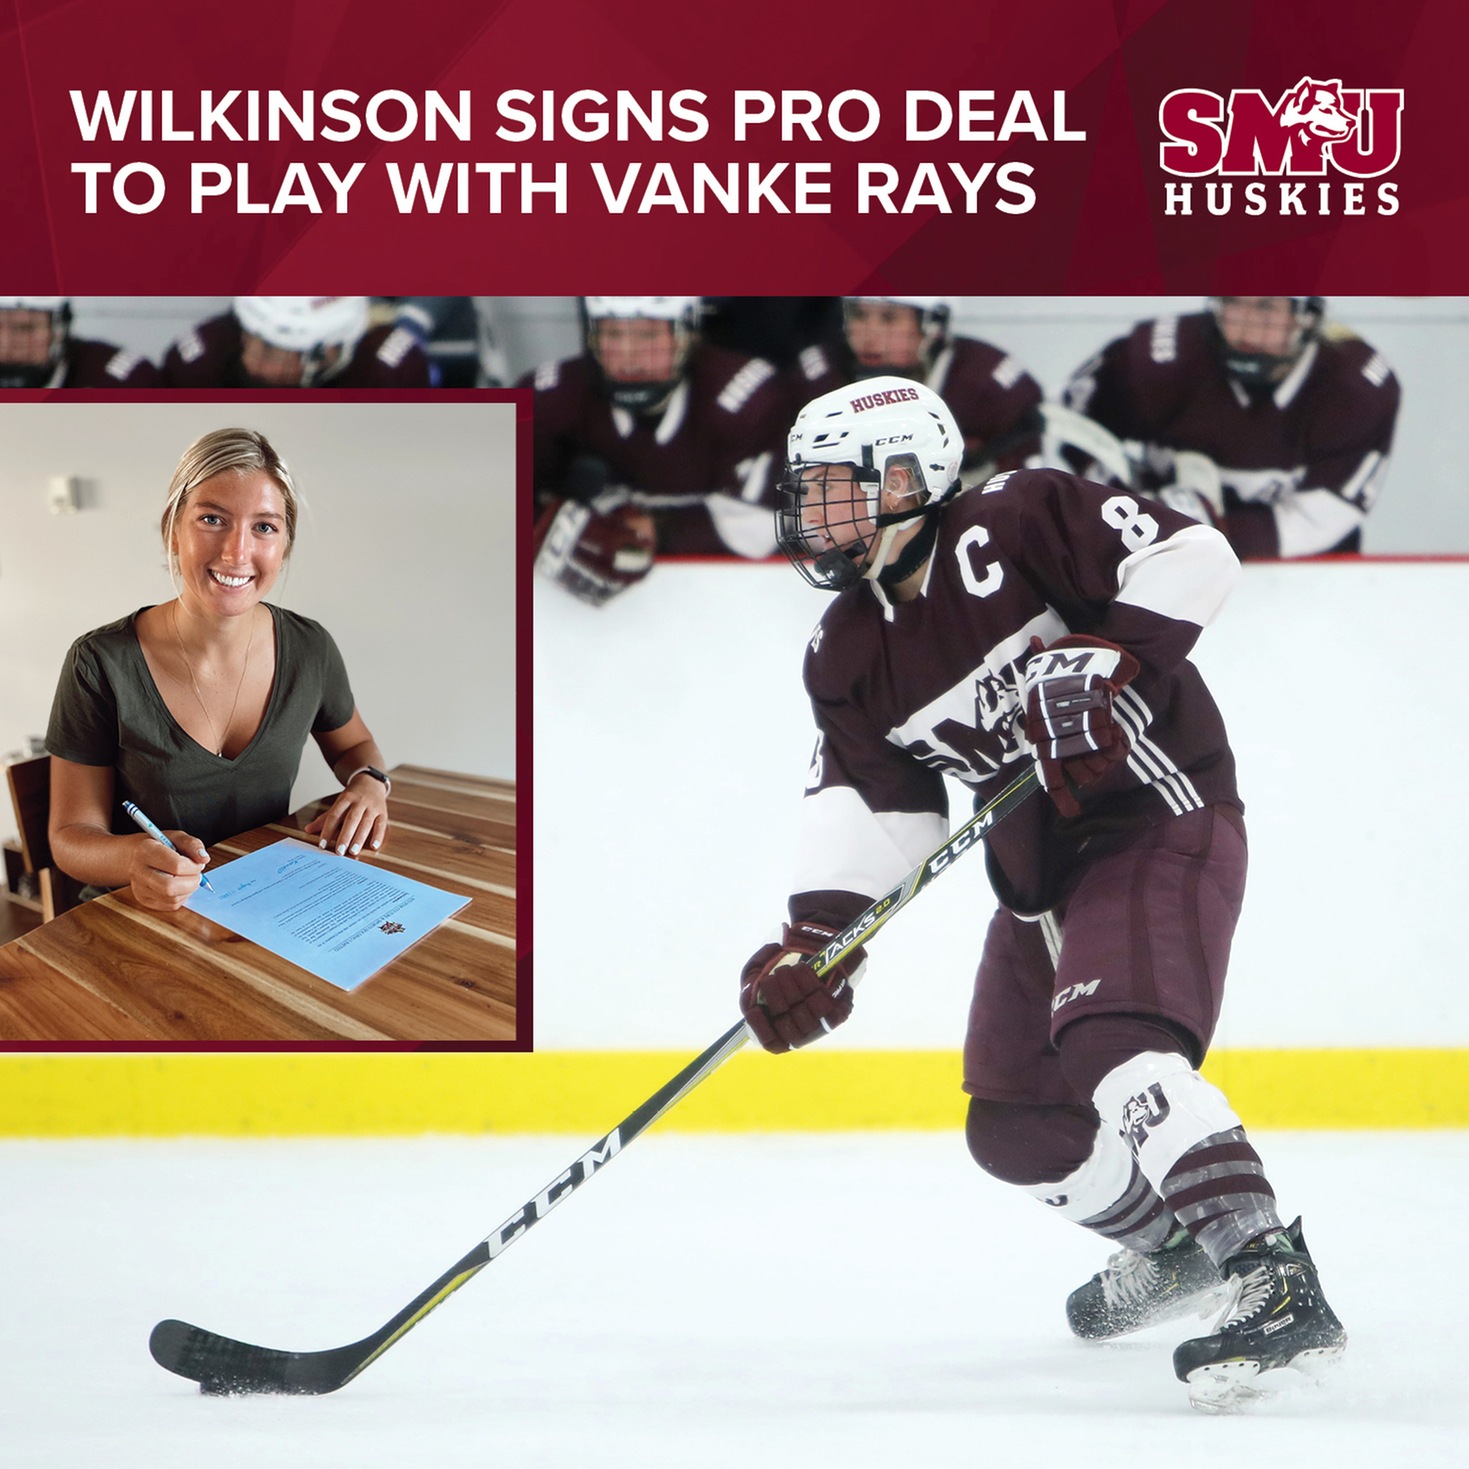 WILKINSON SIGNS PRO DEAL TO PLAY WITH VANKE RAYS